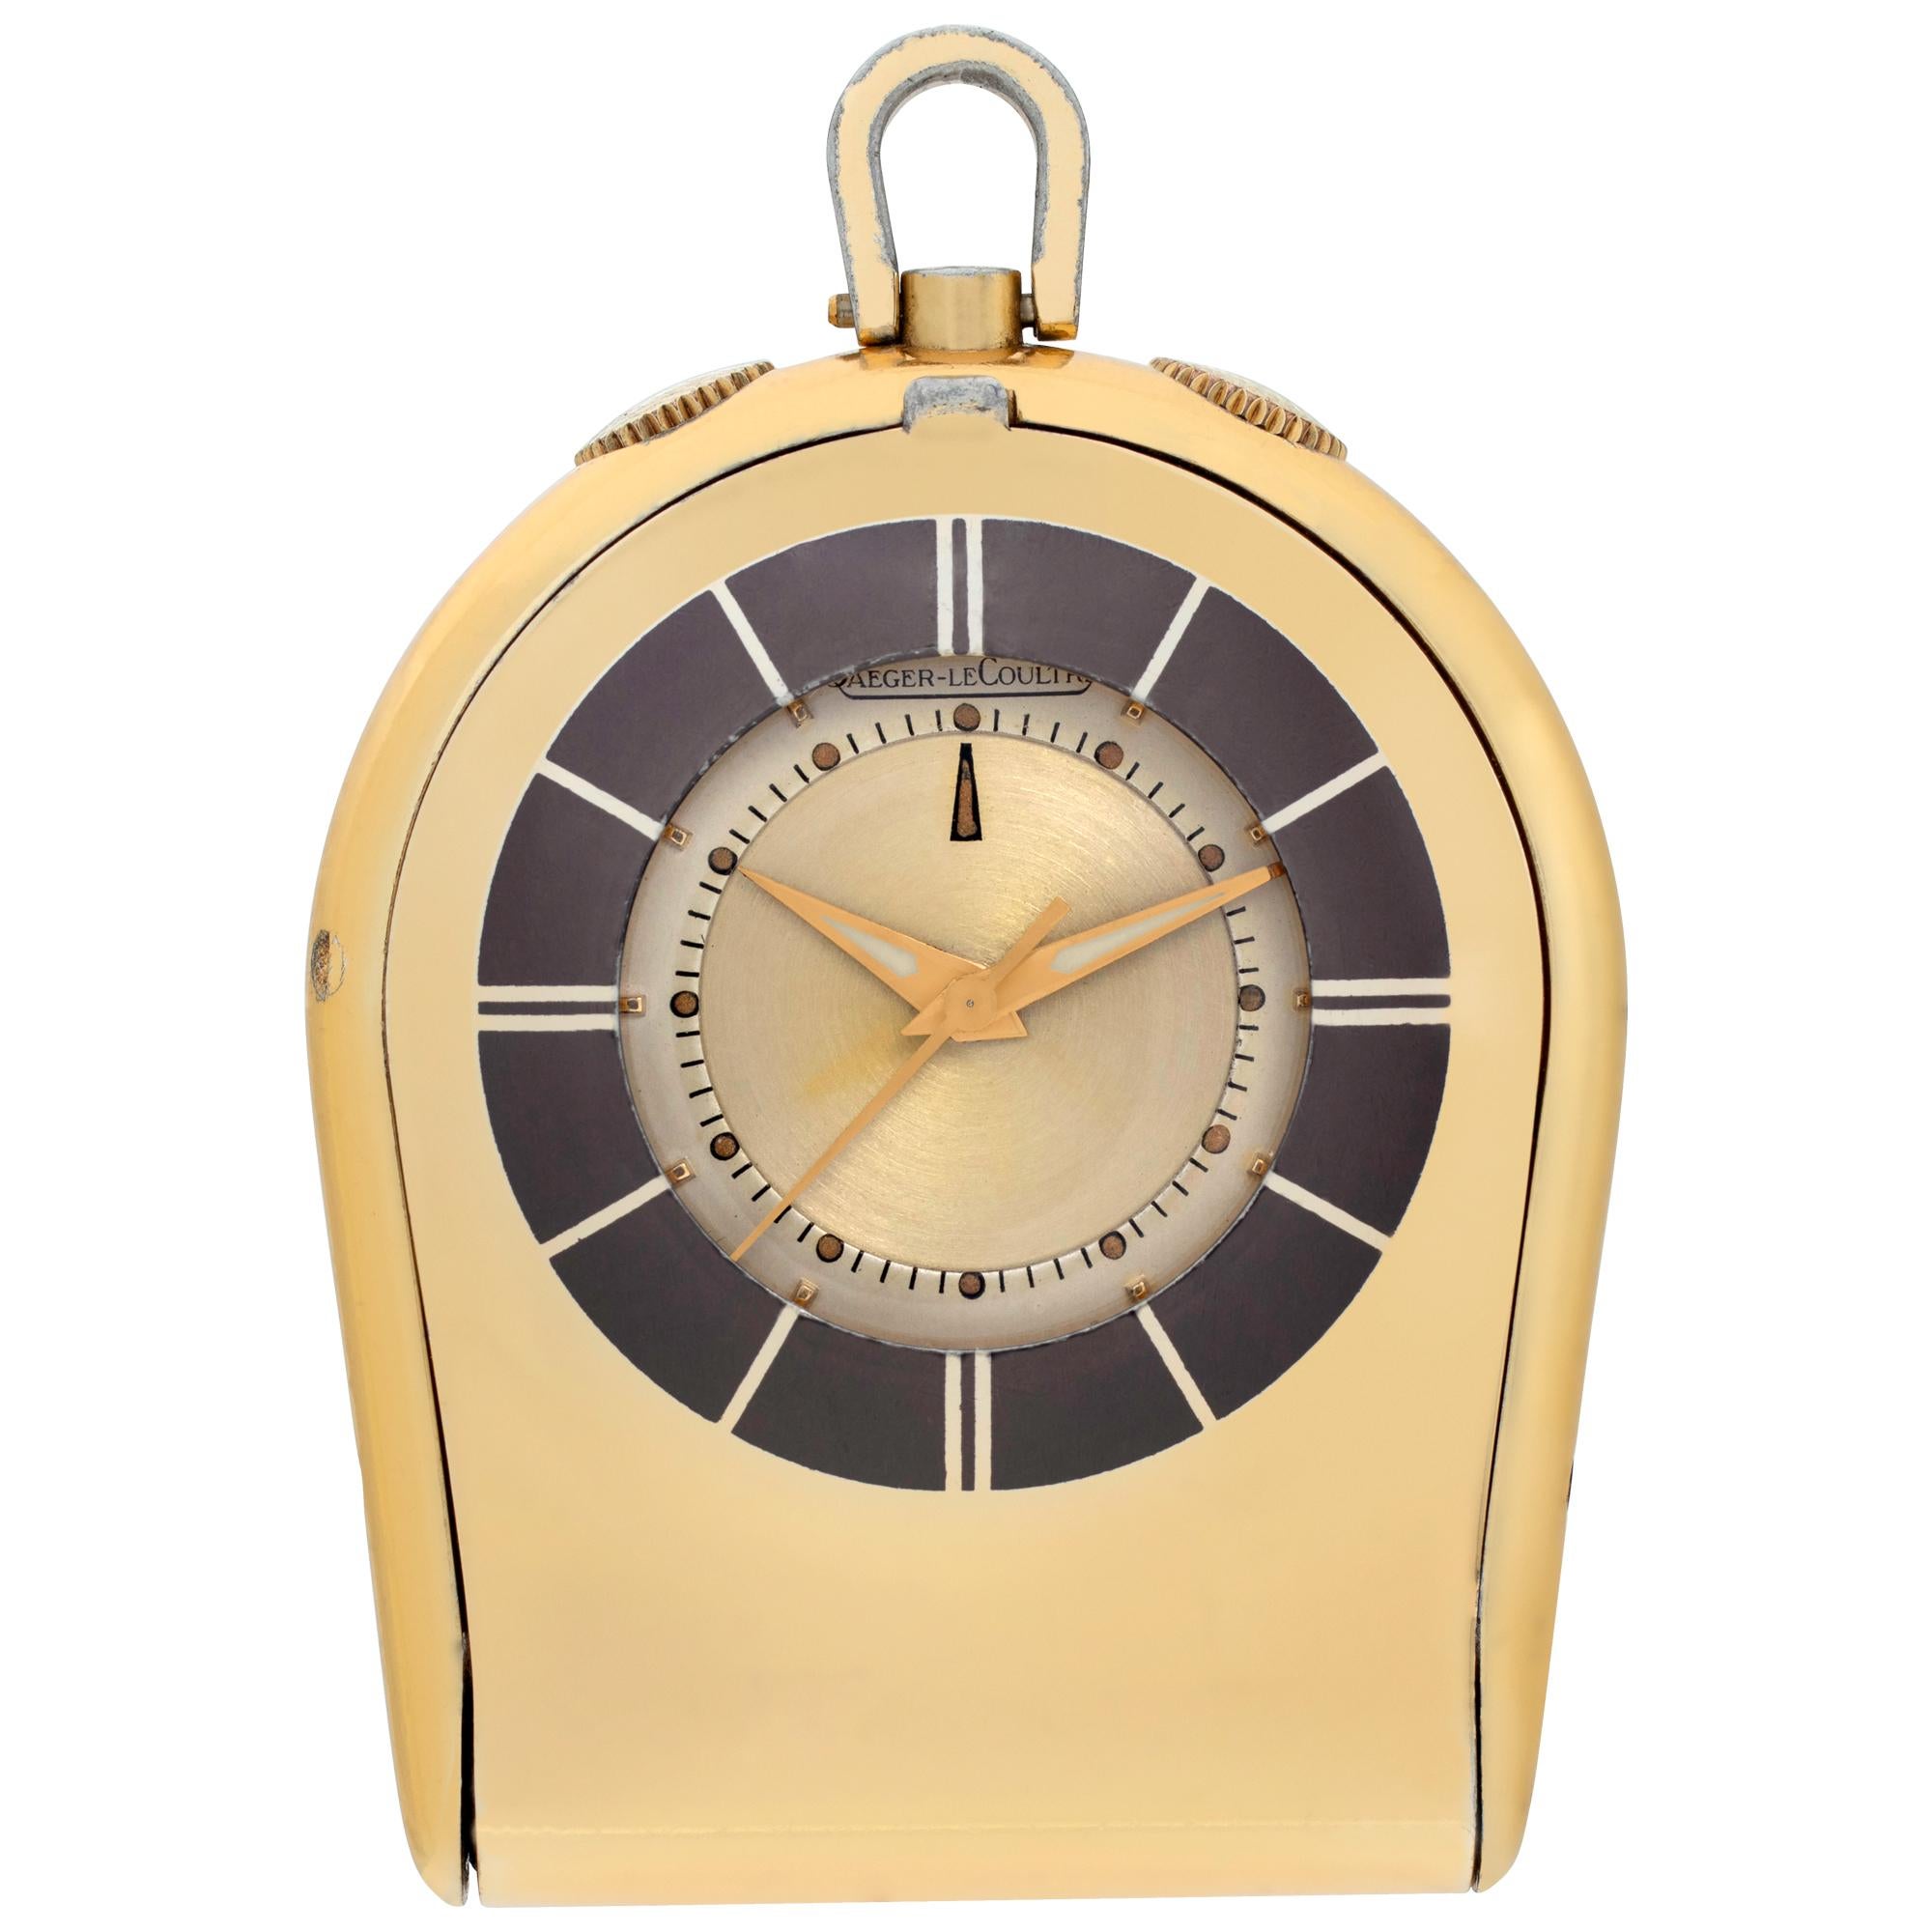 LeCoultre gold fill manual pocket watch